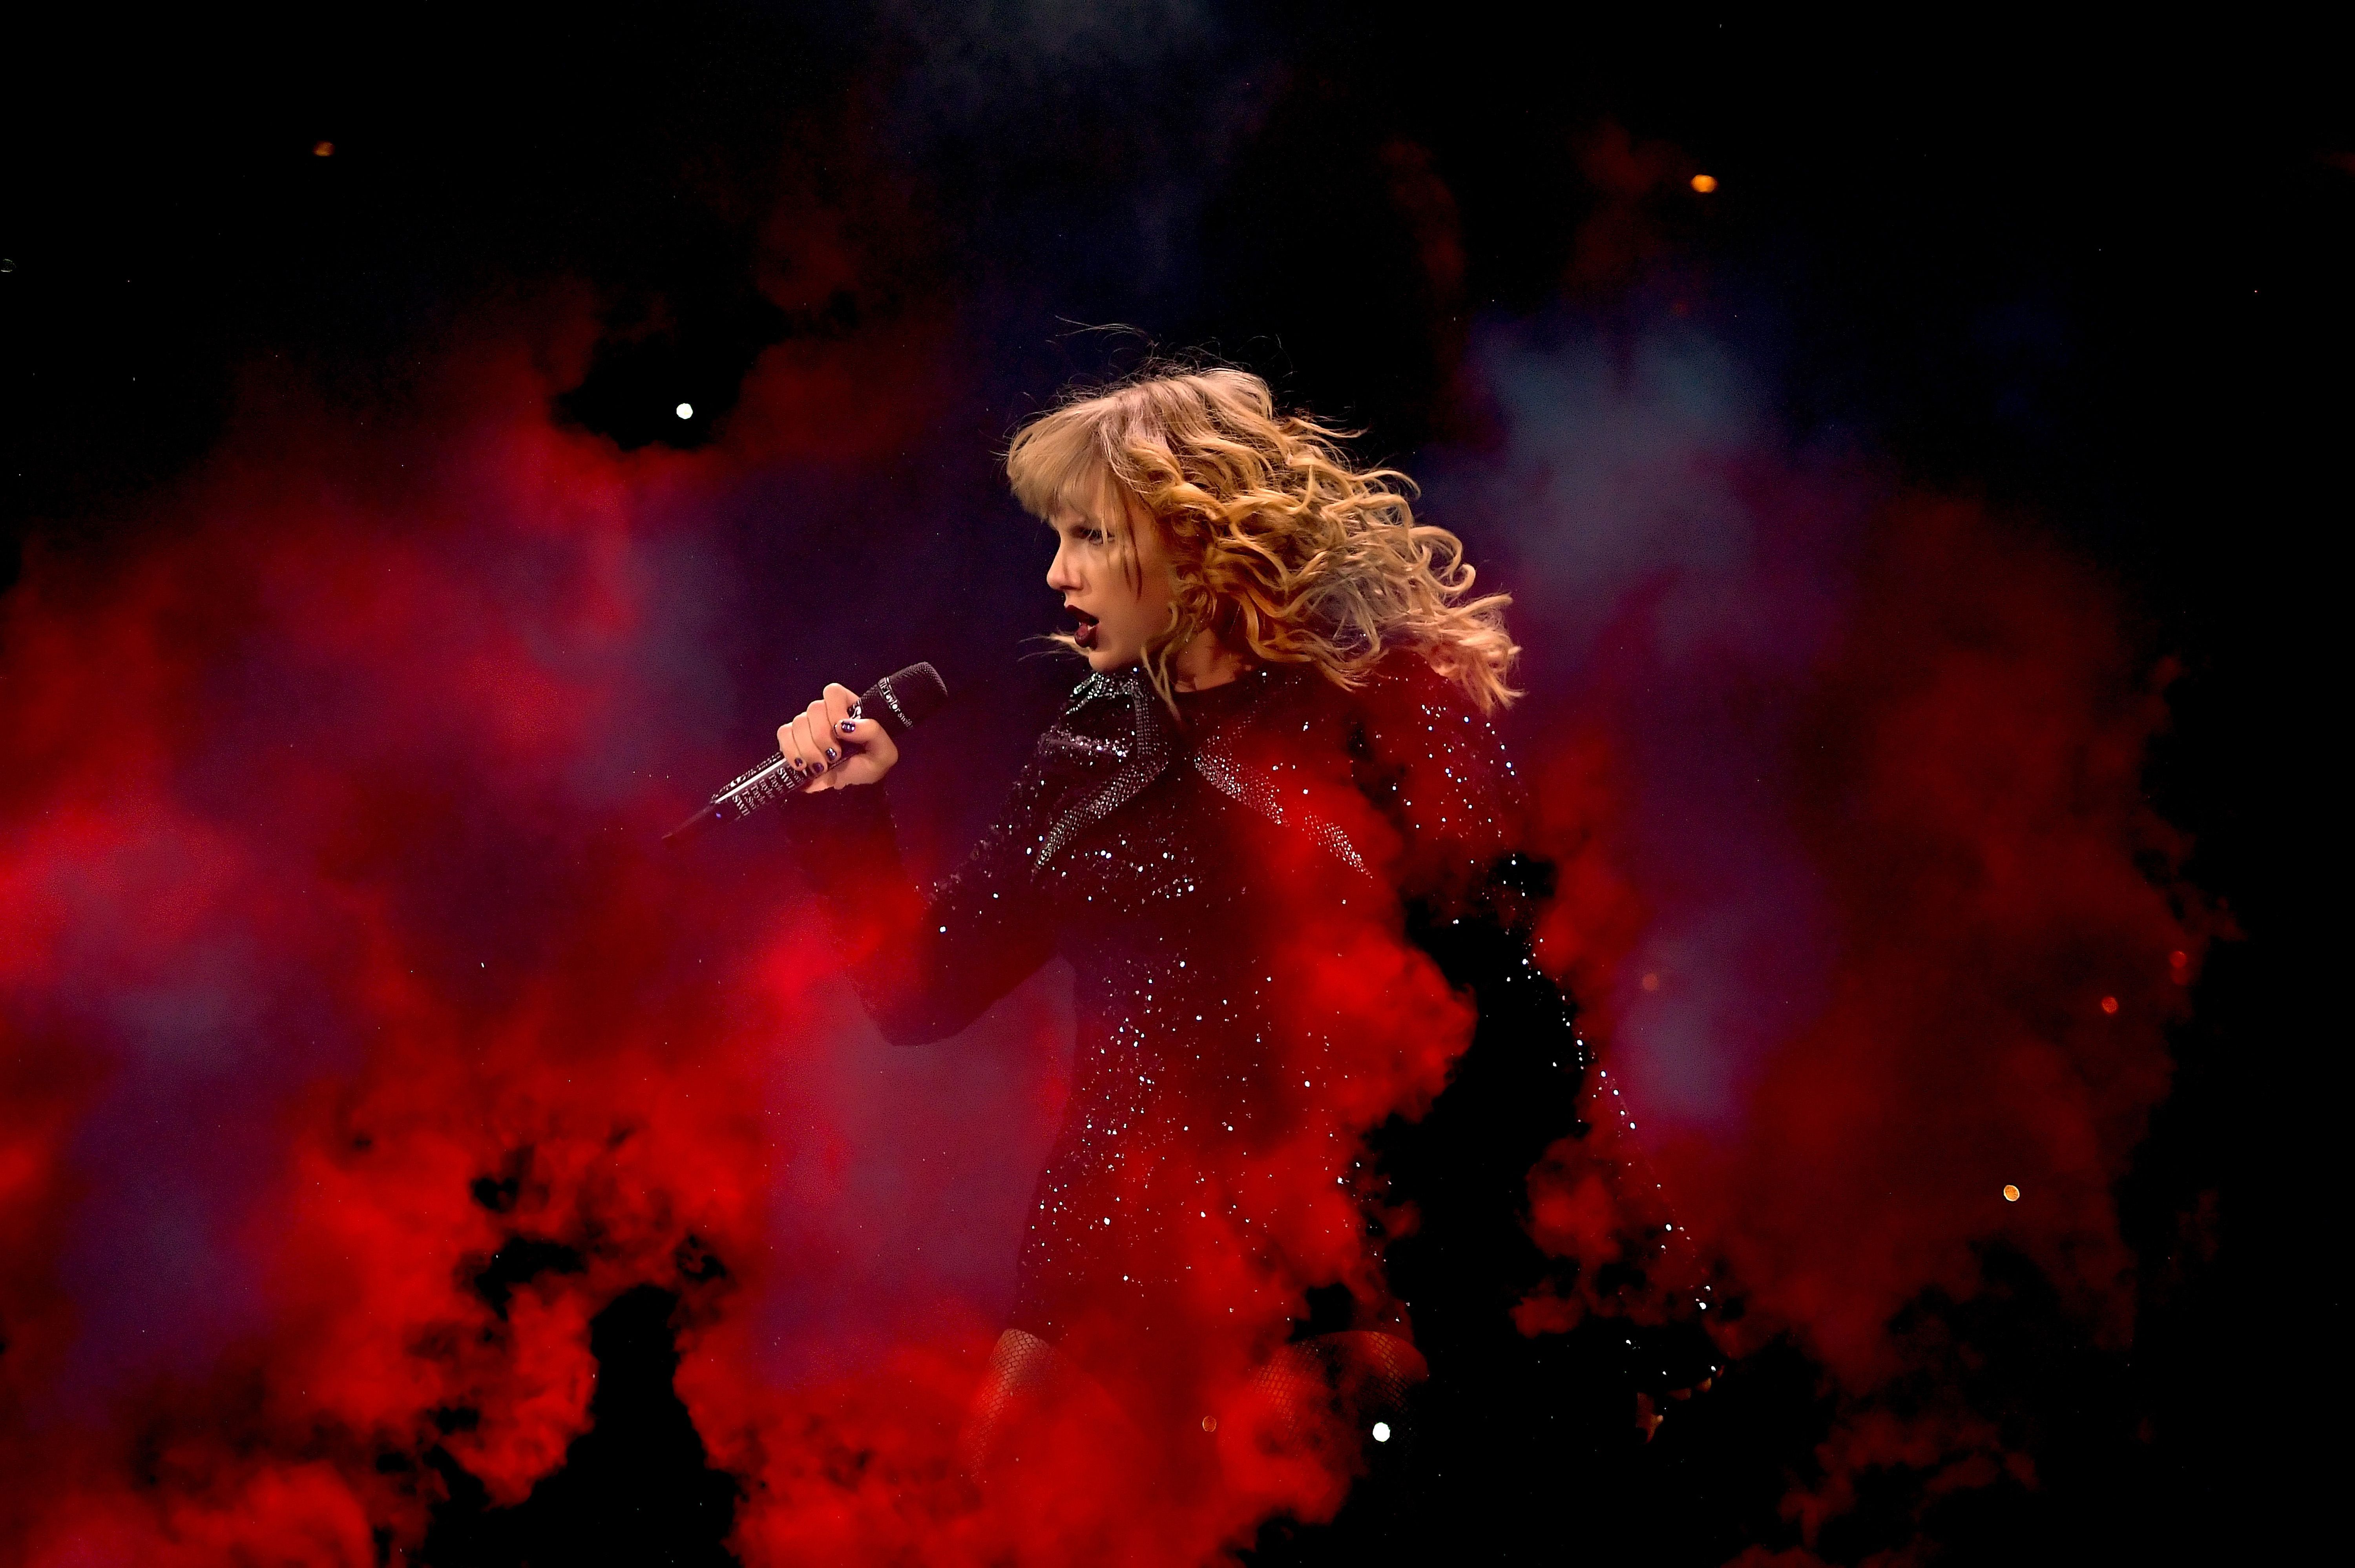 One of the coolest Rep tour pics I've come across. Definitely my new wallpaper